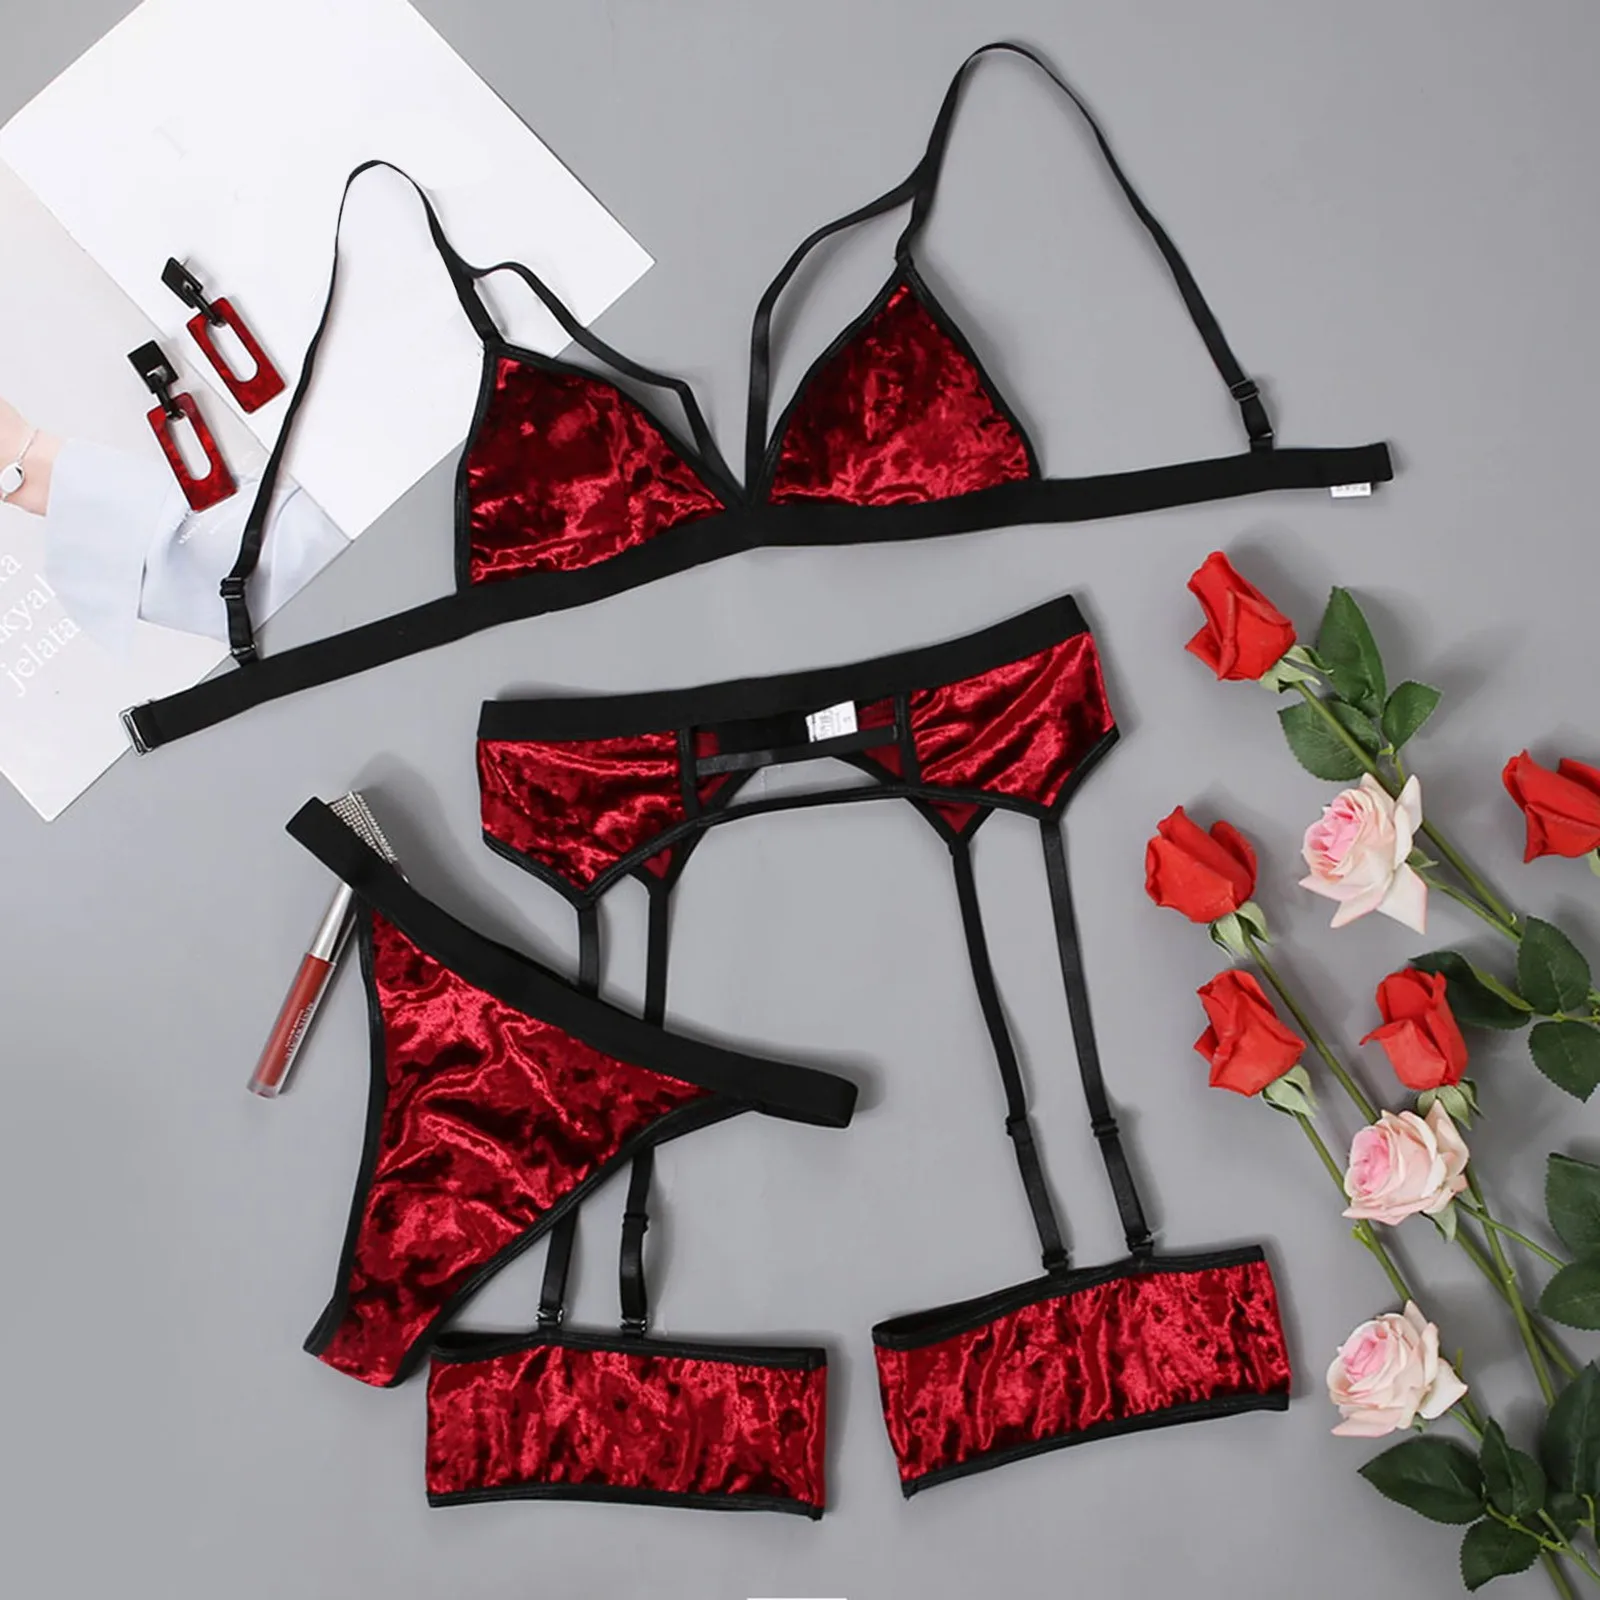 bra and thong set Bra Sets Woman Clothes Embroidery Sexy Ladies Underwear Sexy Hot Lingerie Women's Underwear Set Sensual Erotic Exotic Intimates panty sets